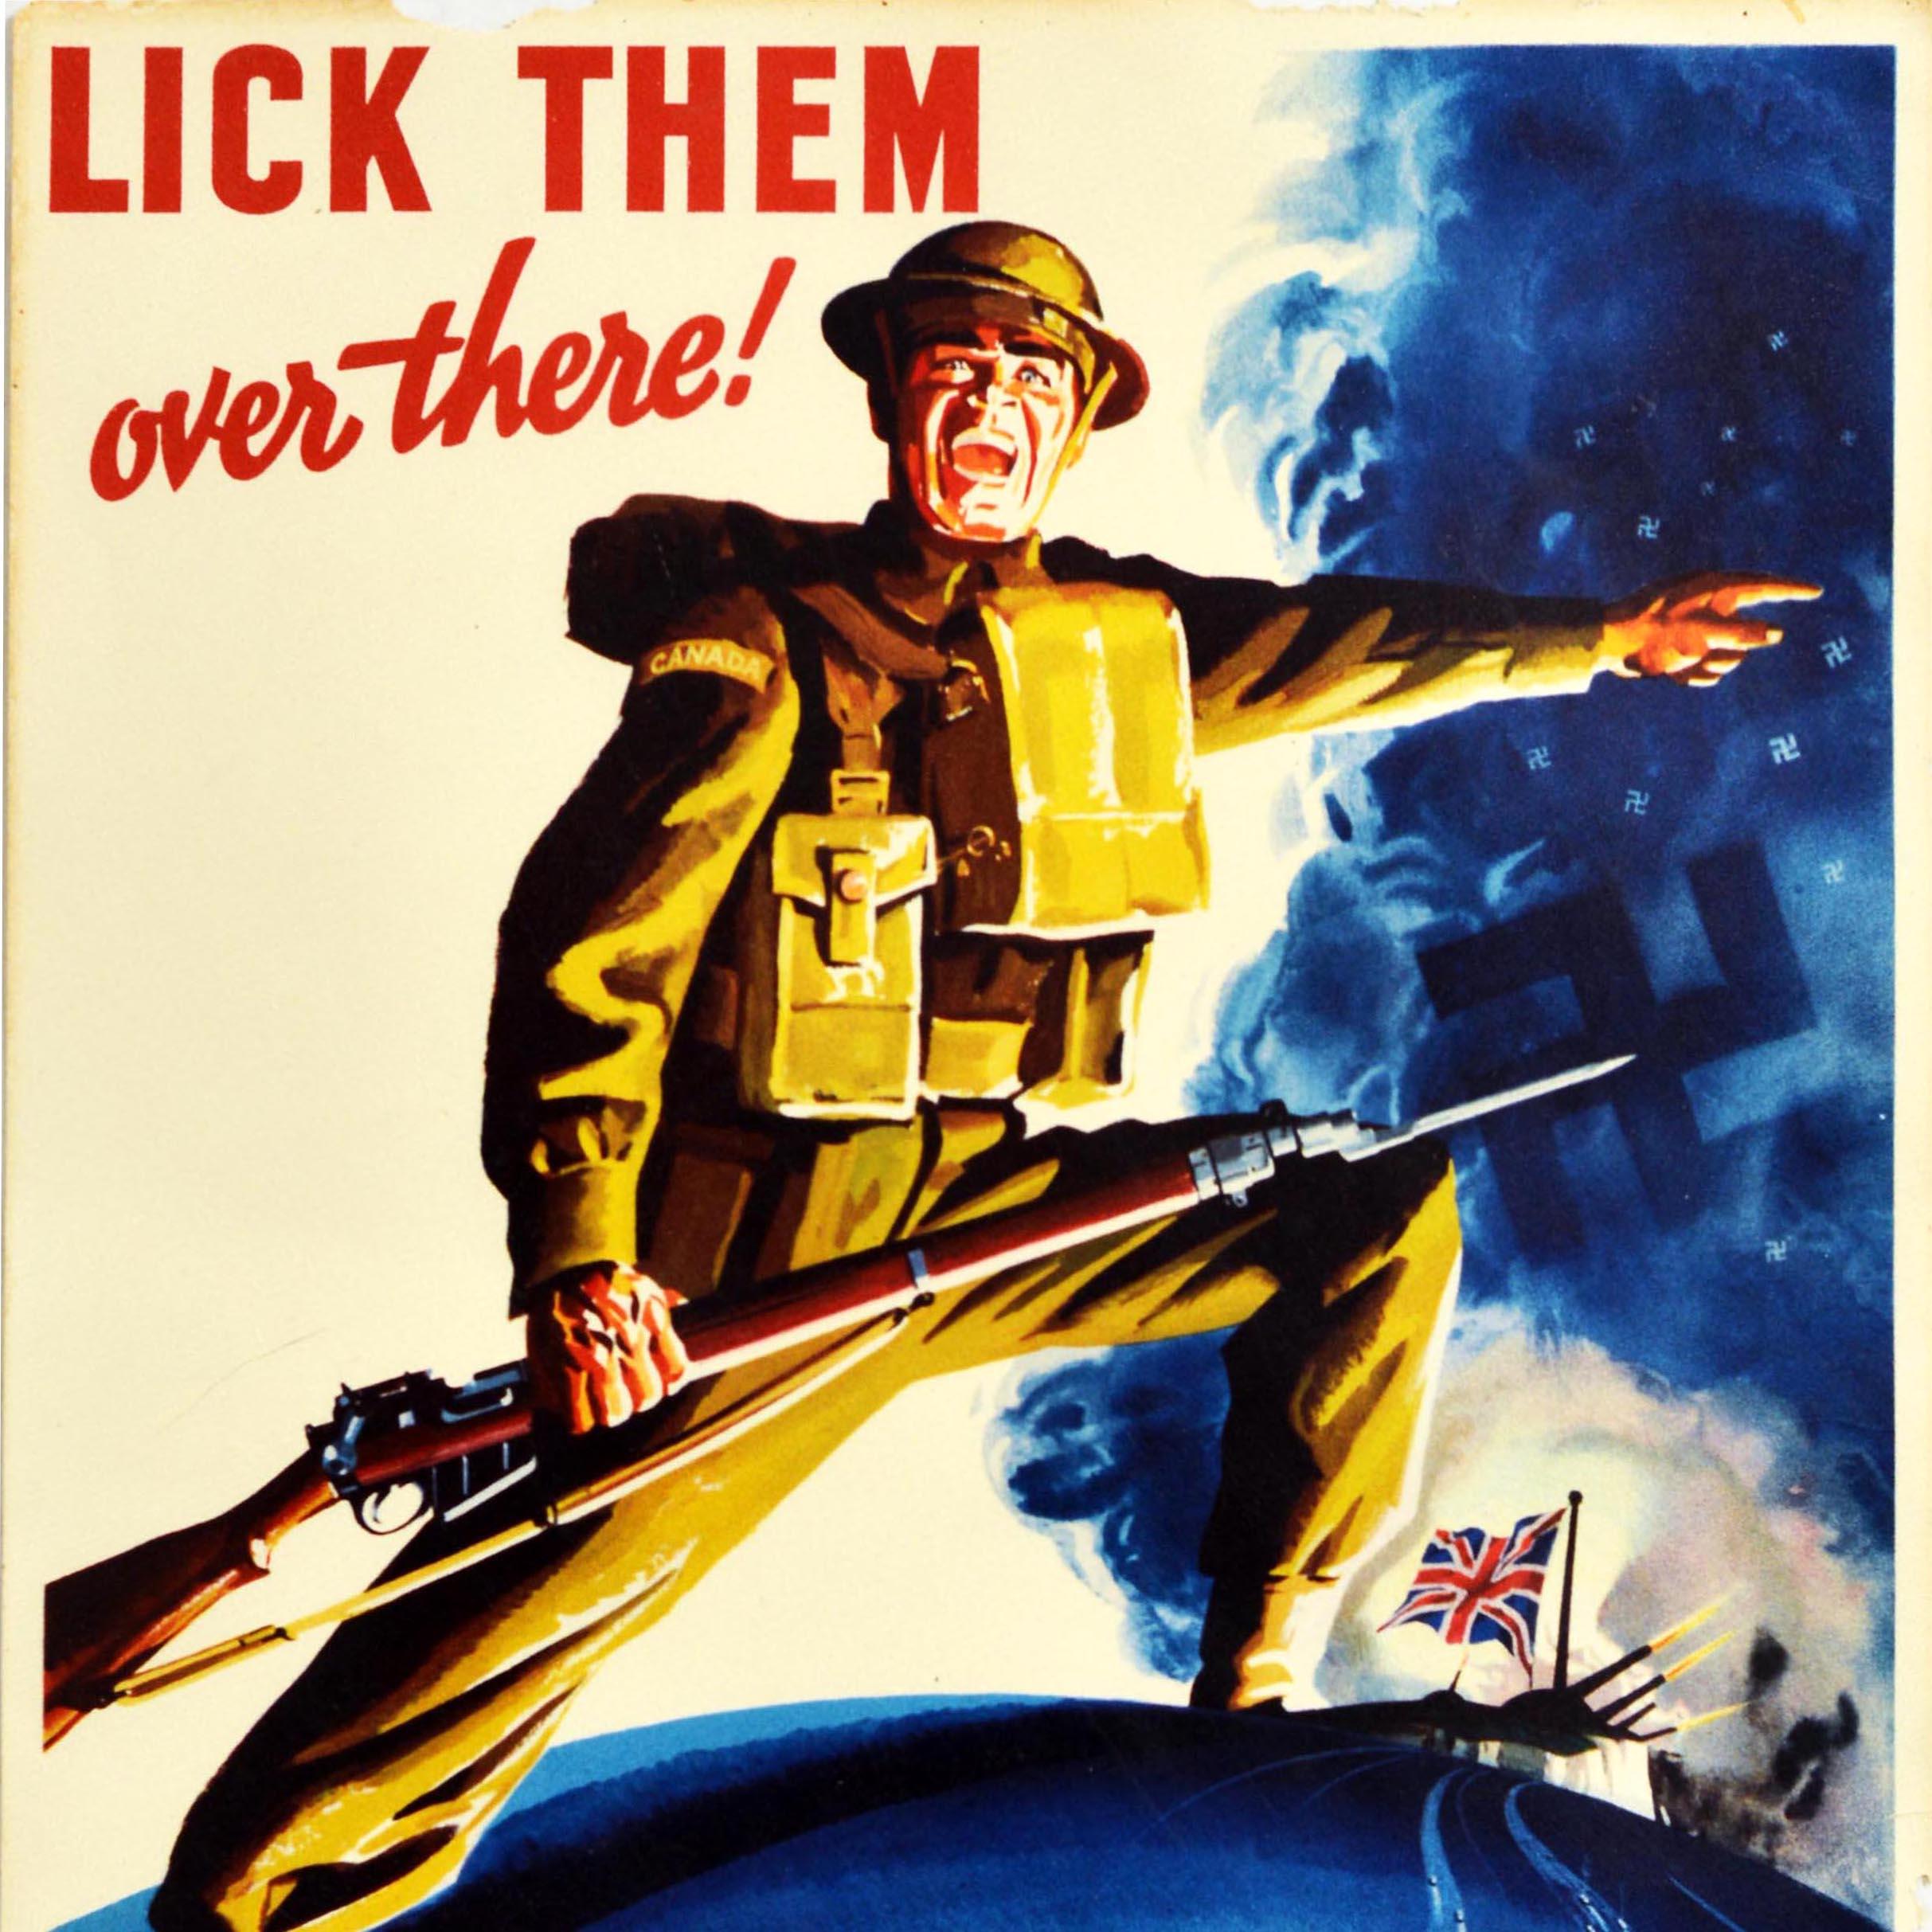 Original Vintage World War Two Poster Lick Them Over There WWII Canada Soldier - Orange Print by Unknown